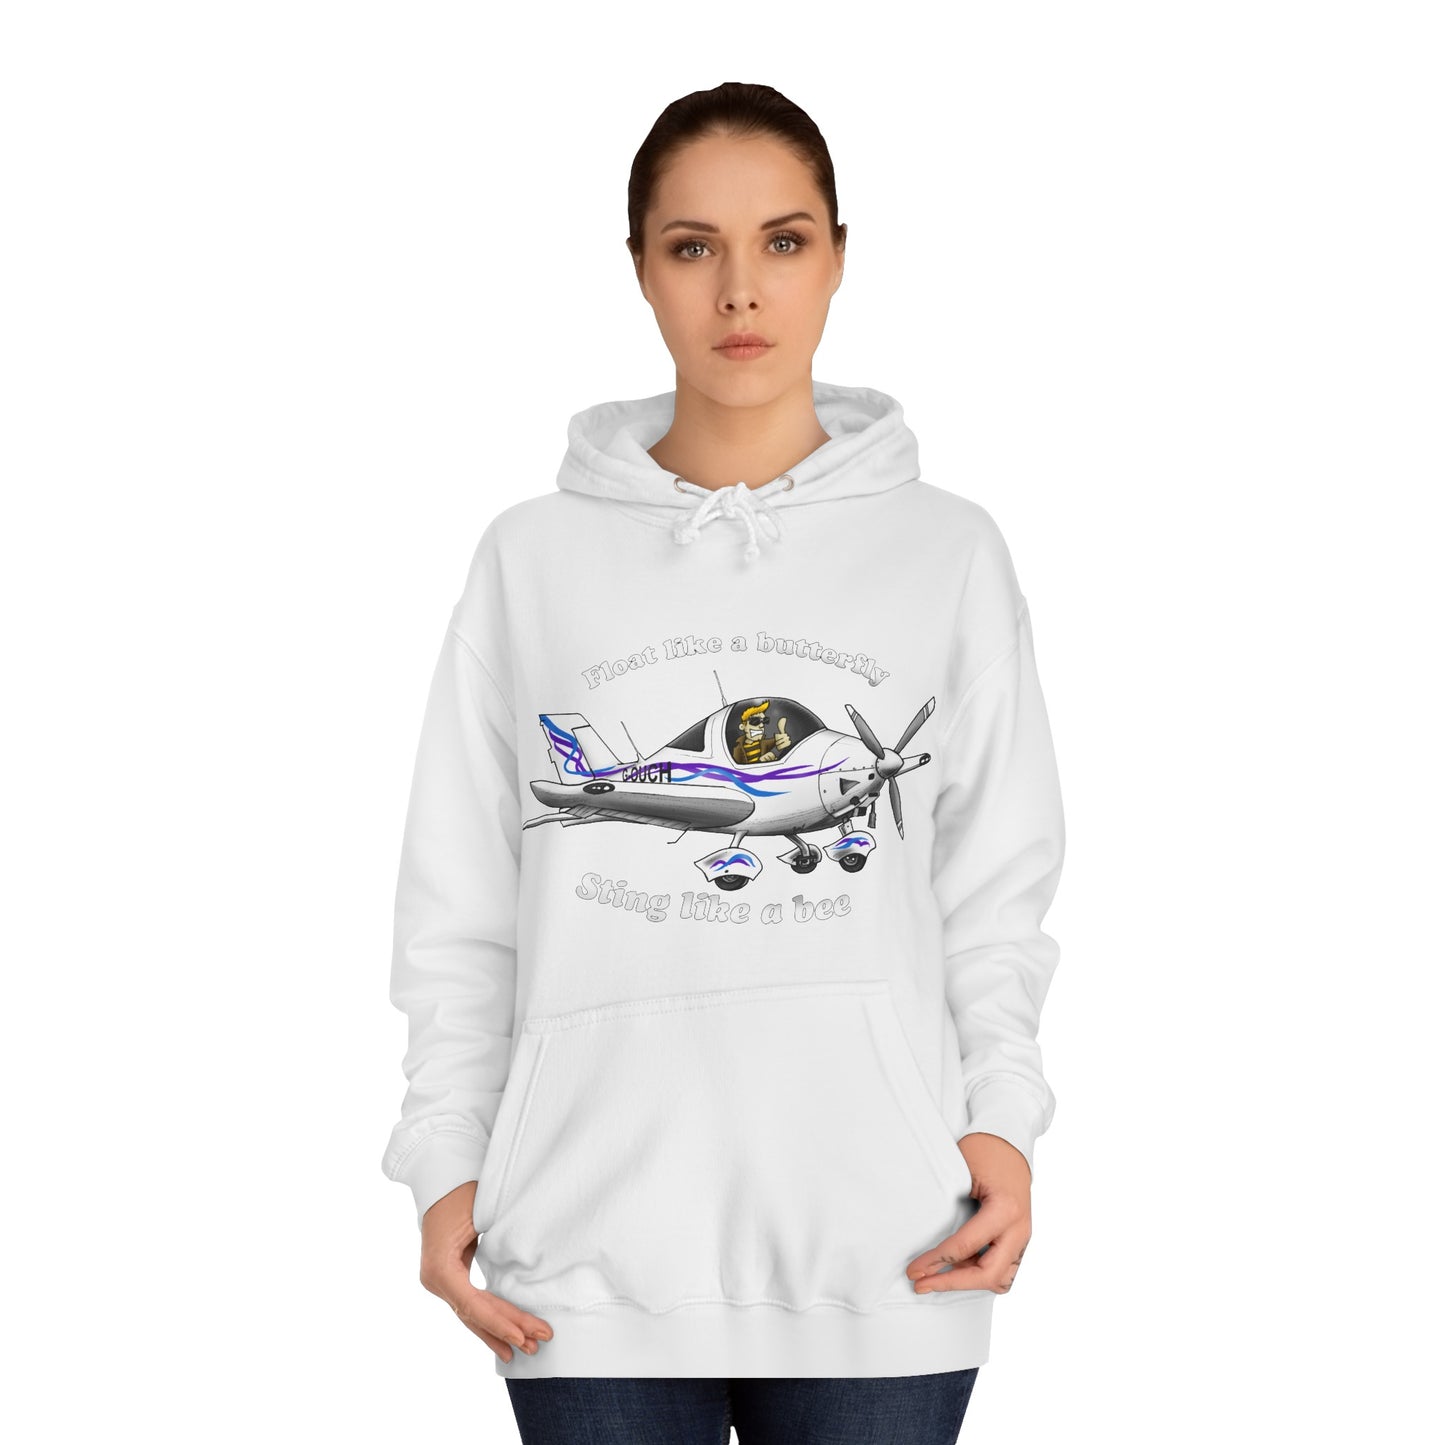 Sting Aircraft Unisex College Hoodie